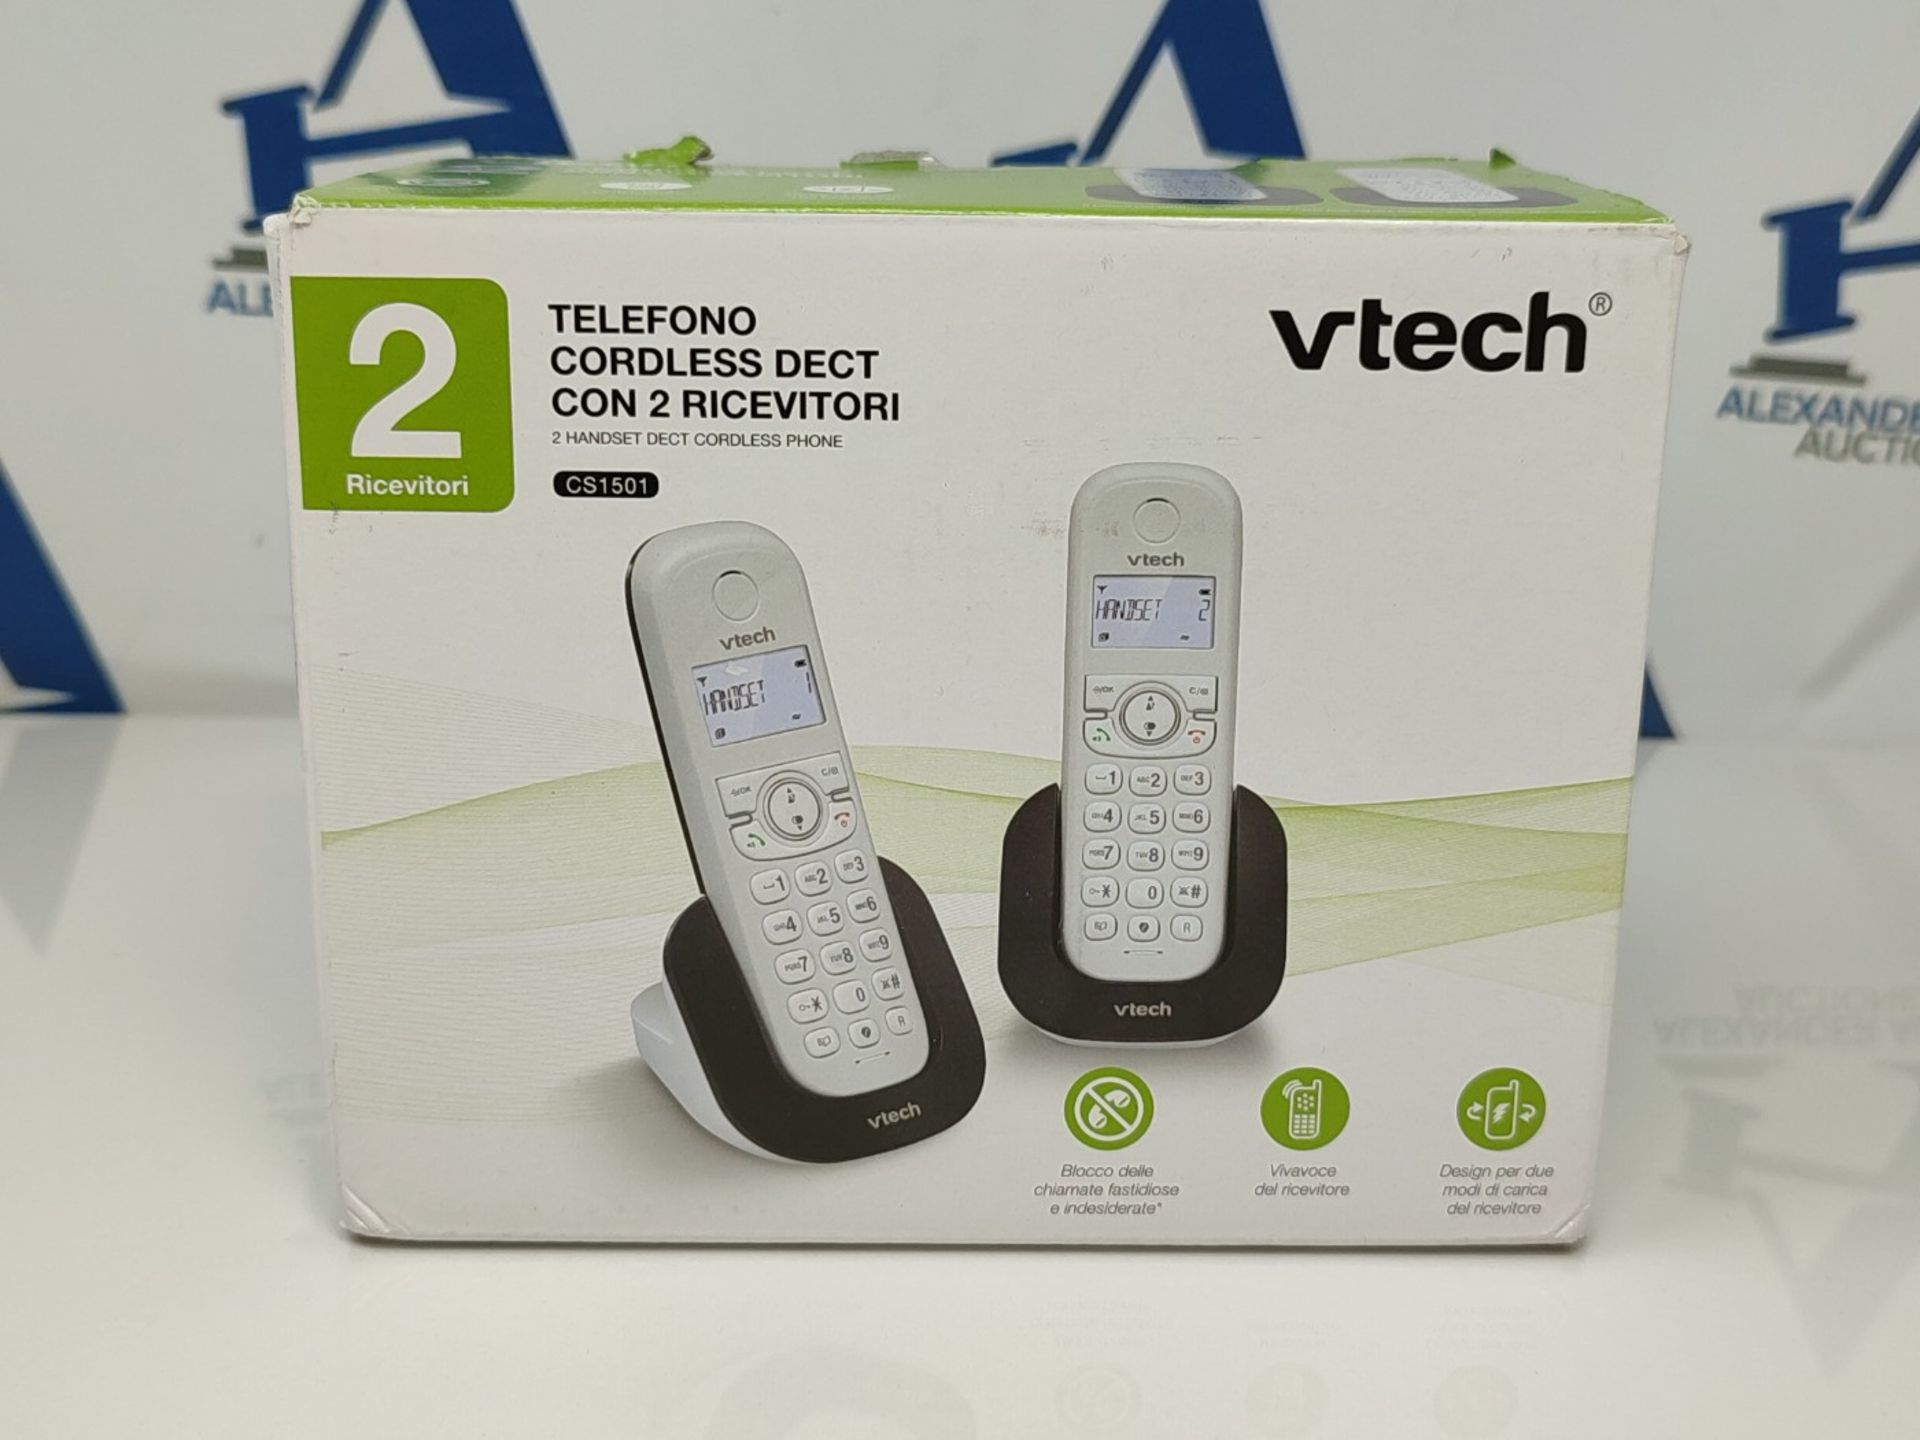 VTech CS1501 Home Cordless Phone Duo, DECT fixed phone with hands-free and call block, - Image 2 of 3